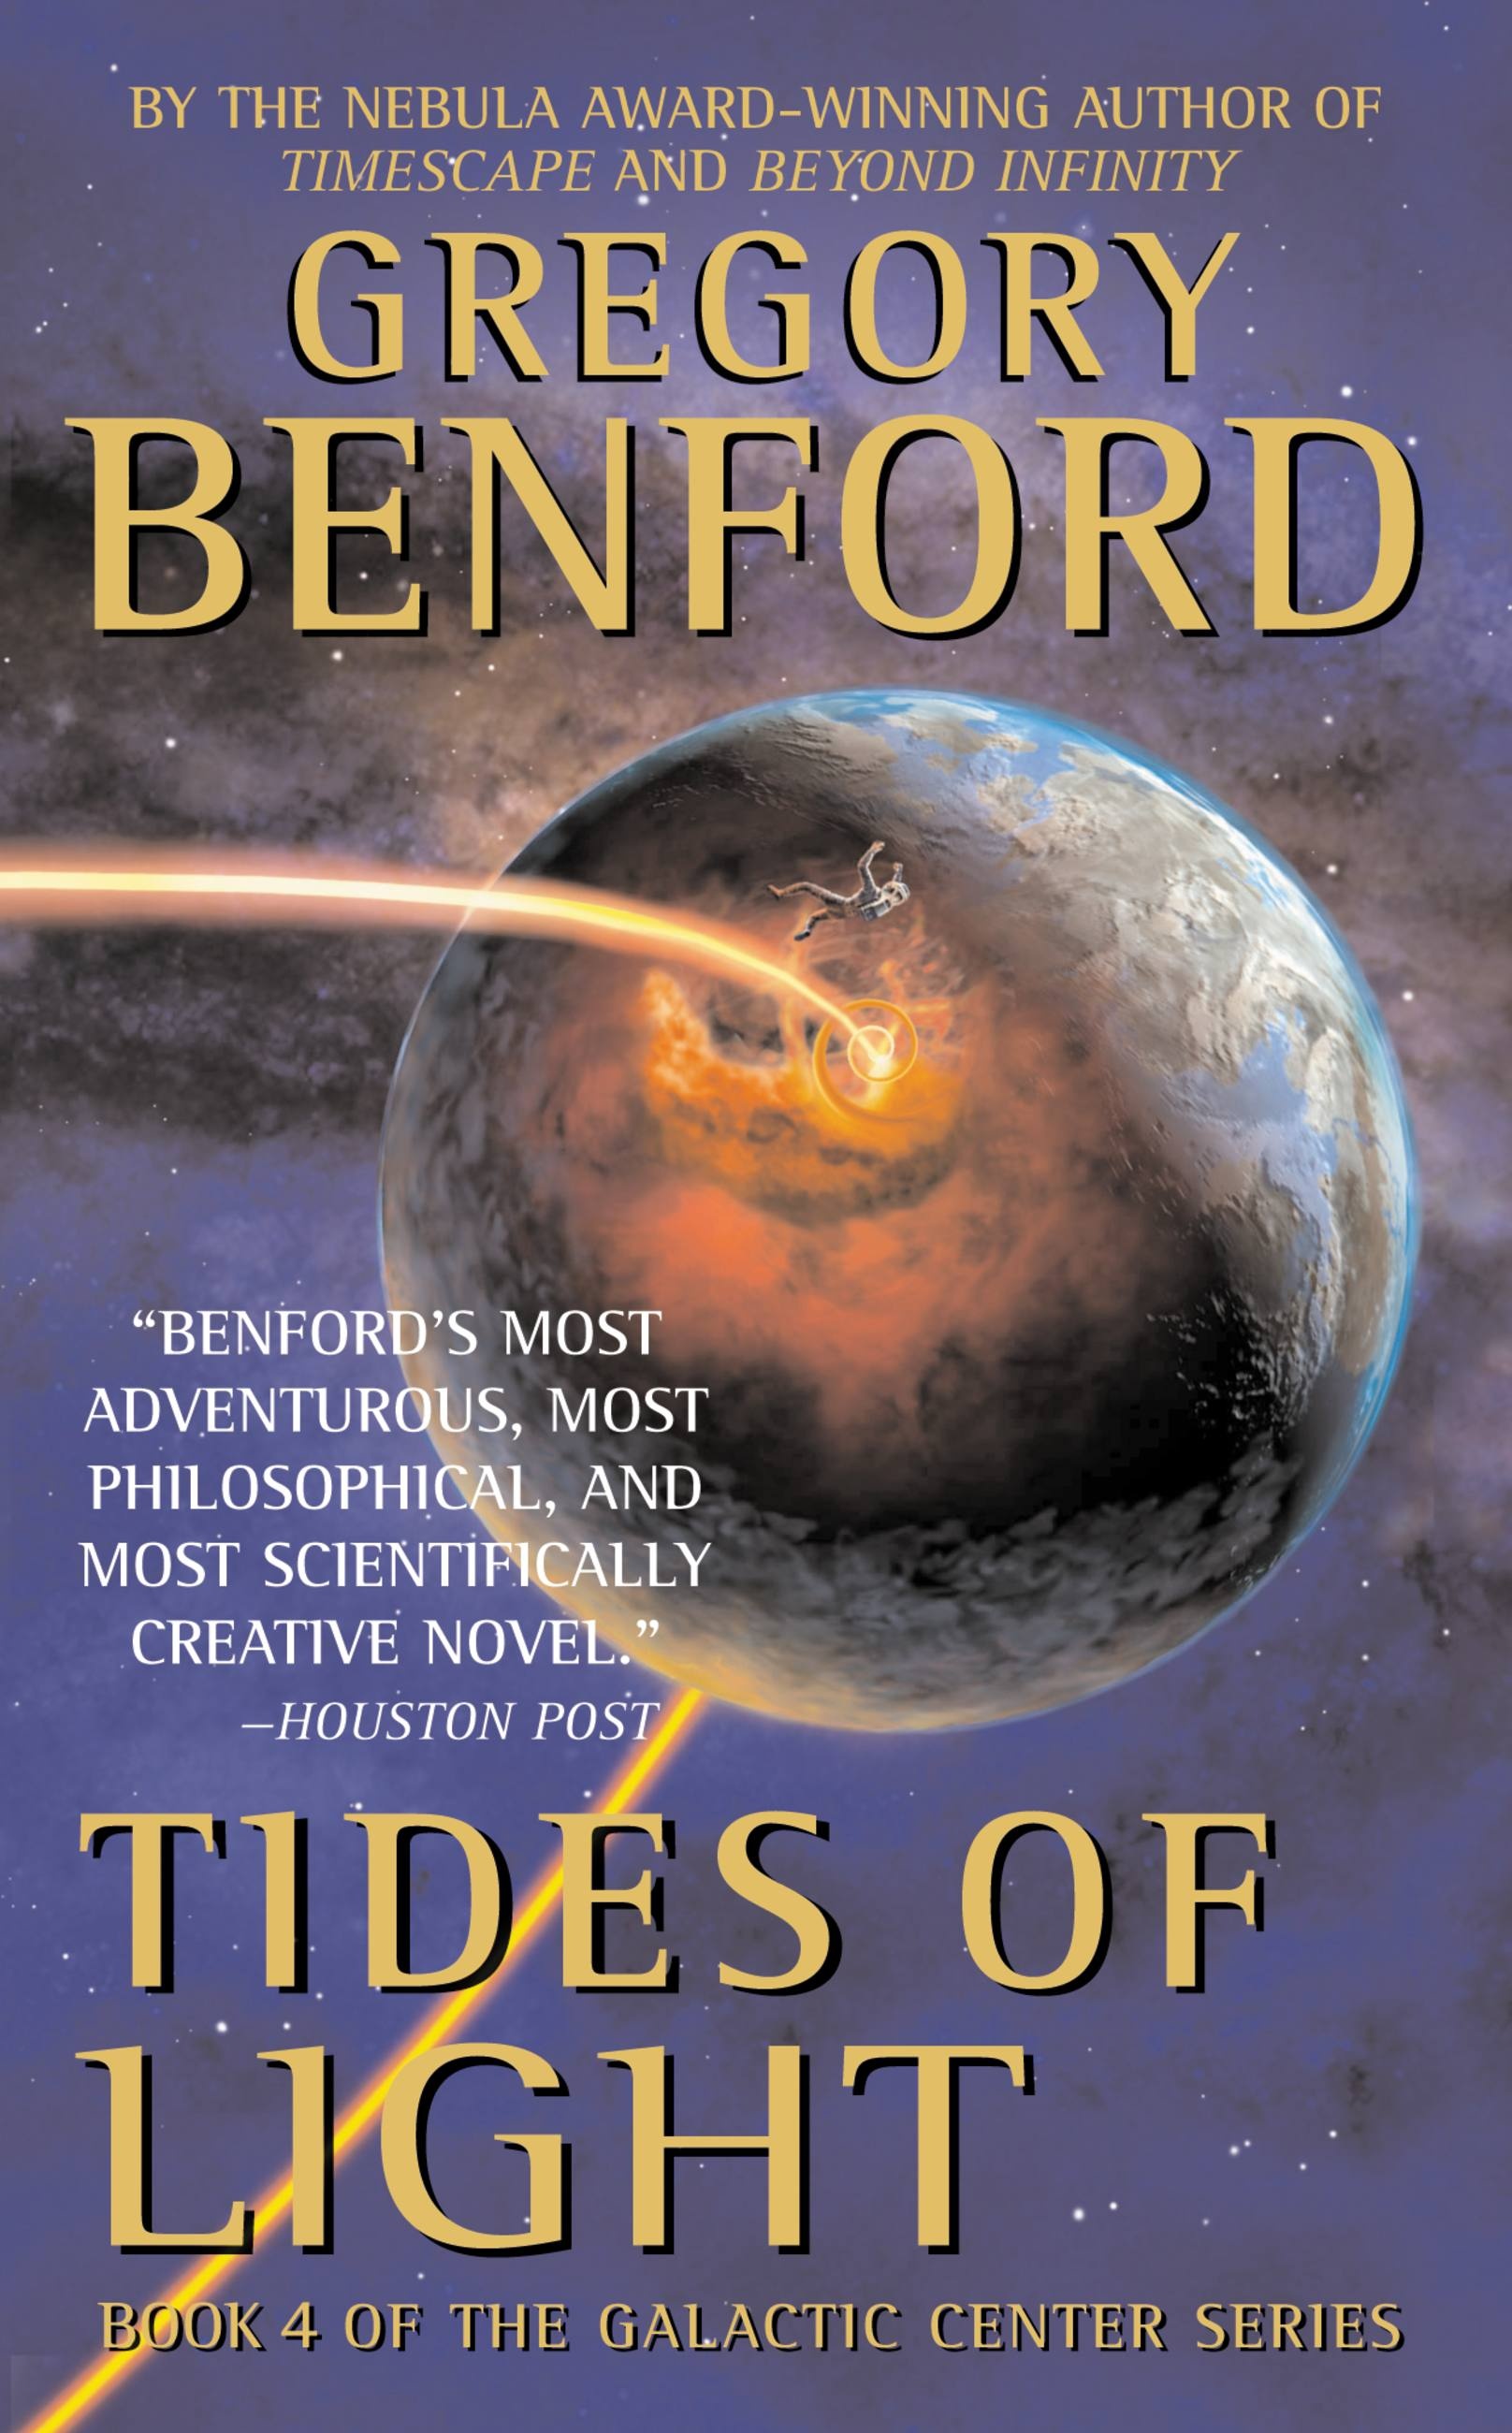 Hachette　Tides　Gregory　of　Group　Light　by　Benford　Book